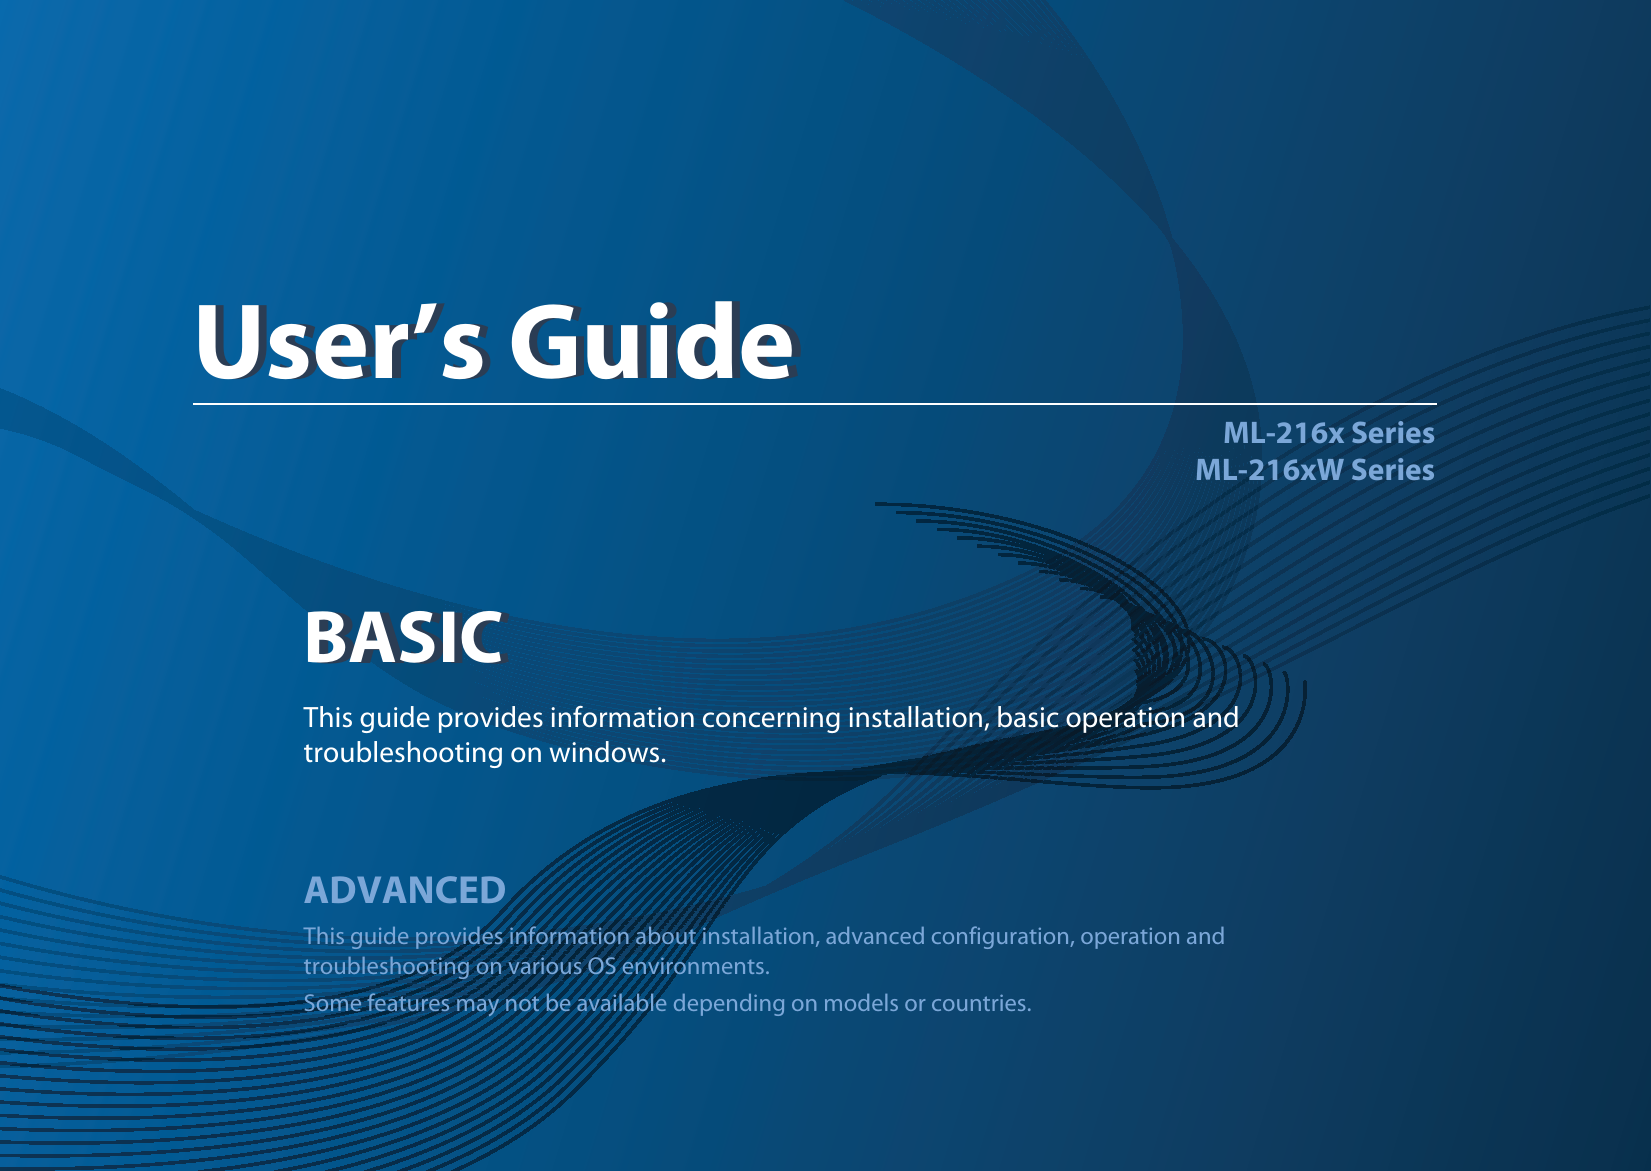 BASICUser’s GuideML-216x SeriesML-216xW SeriesBASICUser’s GuideThis guide provides information concerning installation, basic operation and troubleshooting on windows.ADVANCEDThis guide provides information about installation, advanced configuration, operation and troubleshooting on various OS environments. Some features may not be available depending on models or countries.